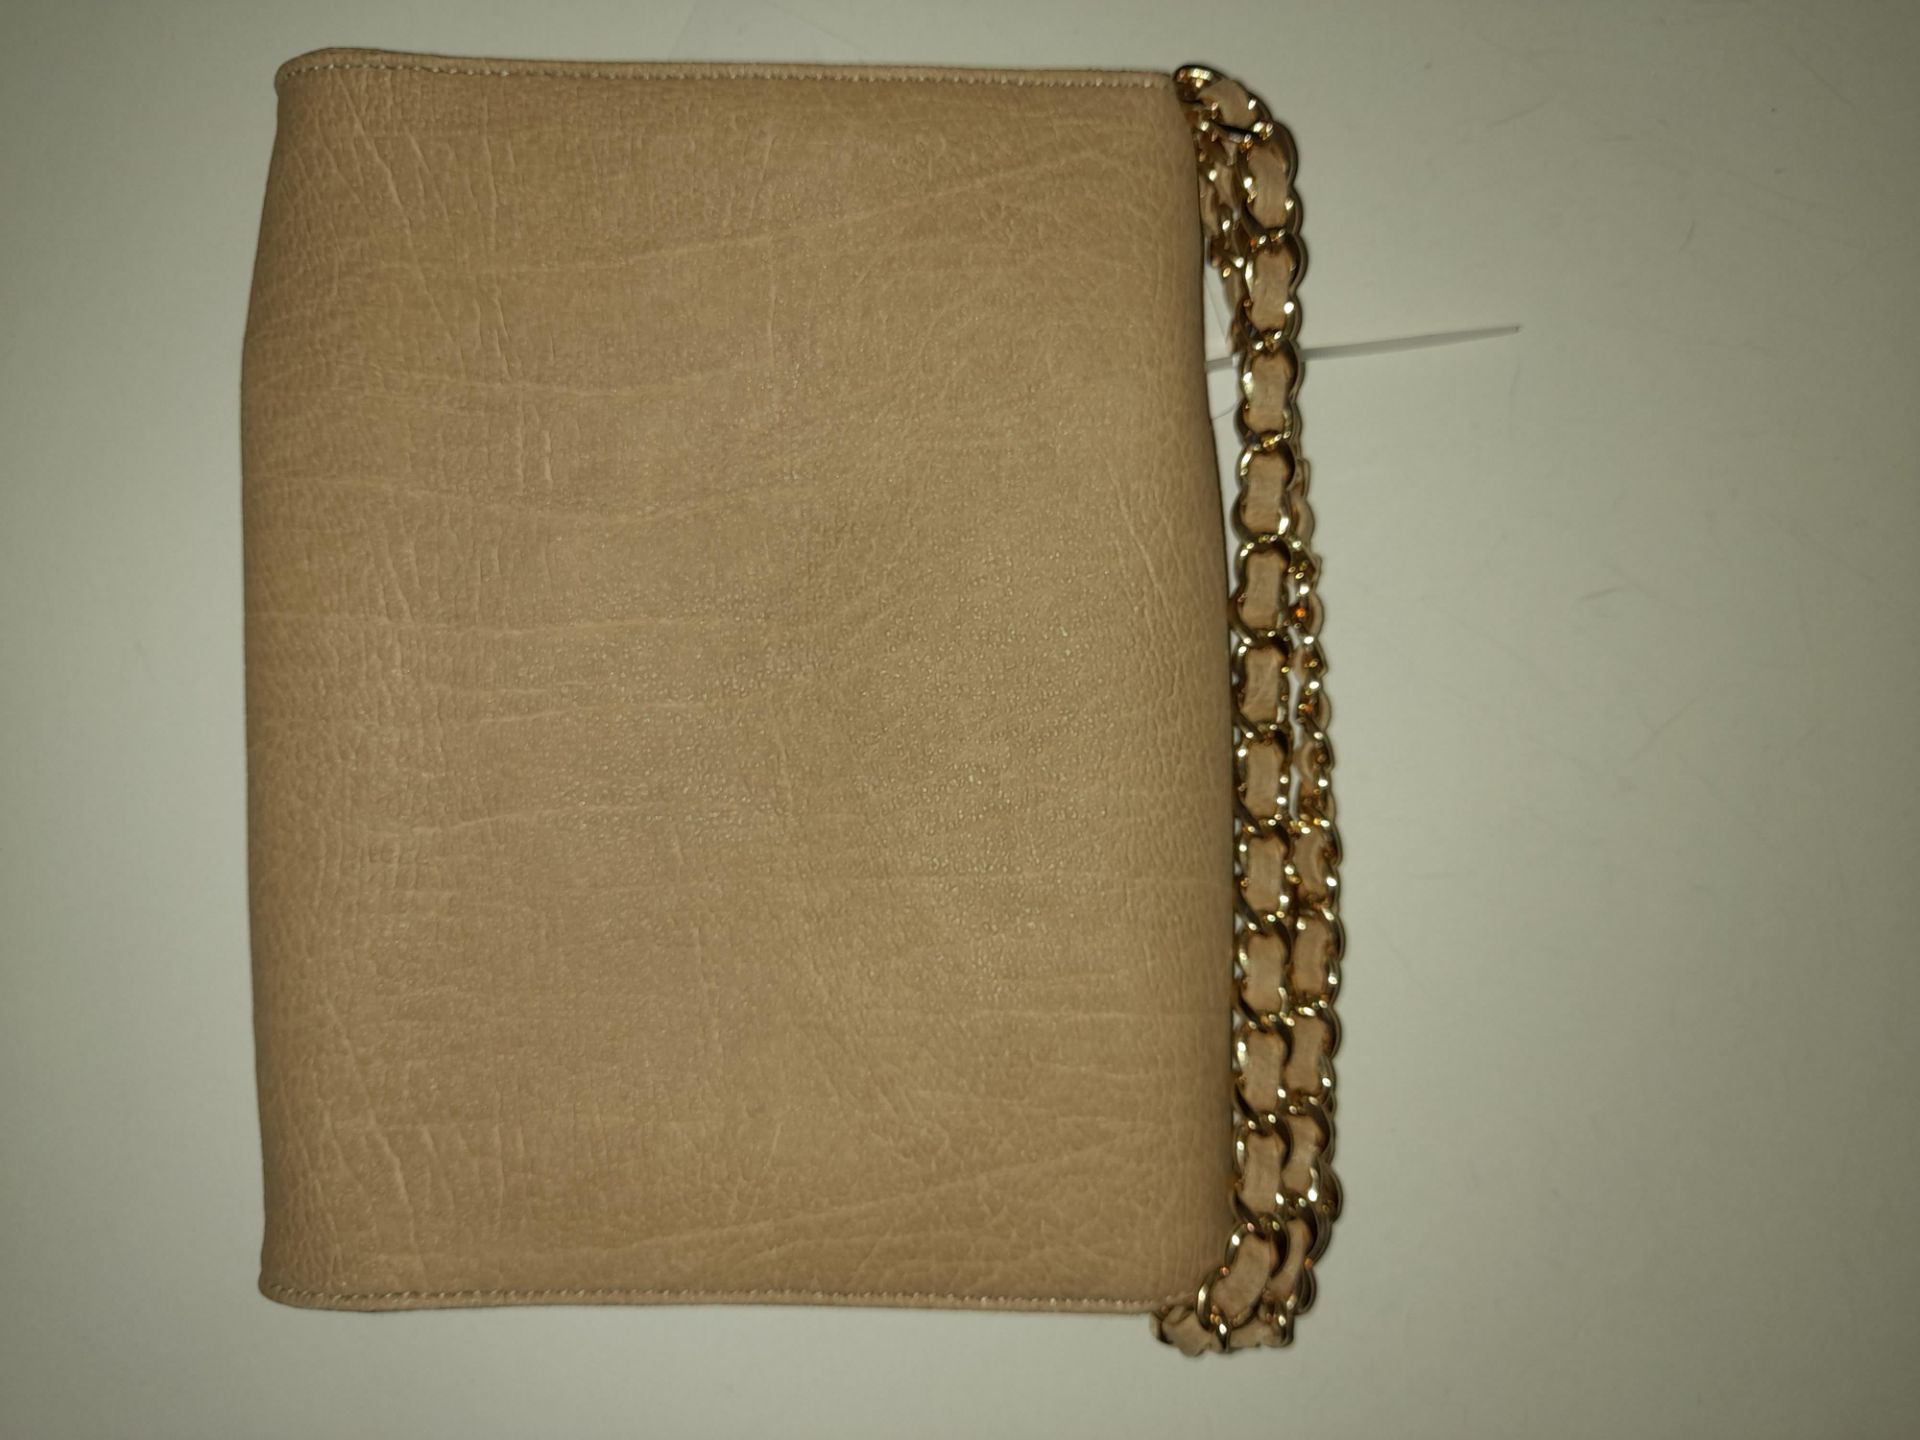 Maviya “Mannie” Mustard Vegan Italian Leather Evening Clutch Bag with Grained Finish, Faux Suede - Image 2 of 3